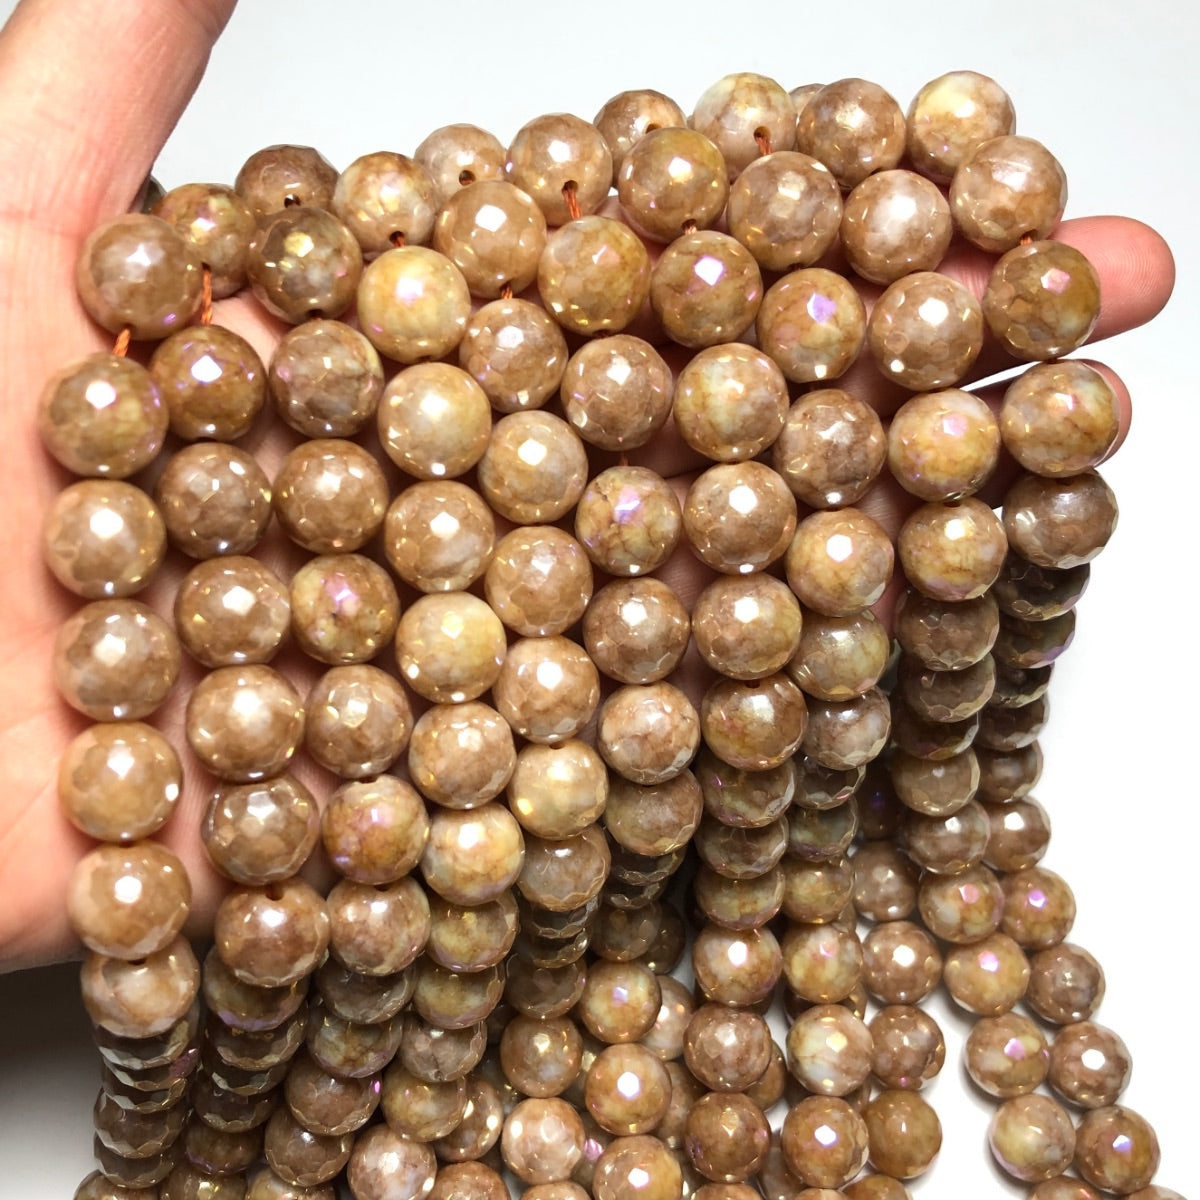 2 Strands/lot 12mm Electroplated AB Khaki Faceted Jade Stone Beads Electroplated Beads 12mm Stone Beads Electroplated Faceted Jade Beads New Beads Arrivals Charms Beads Beyond